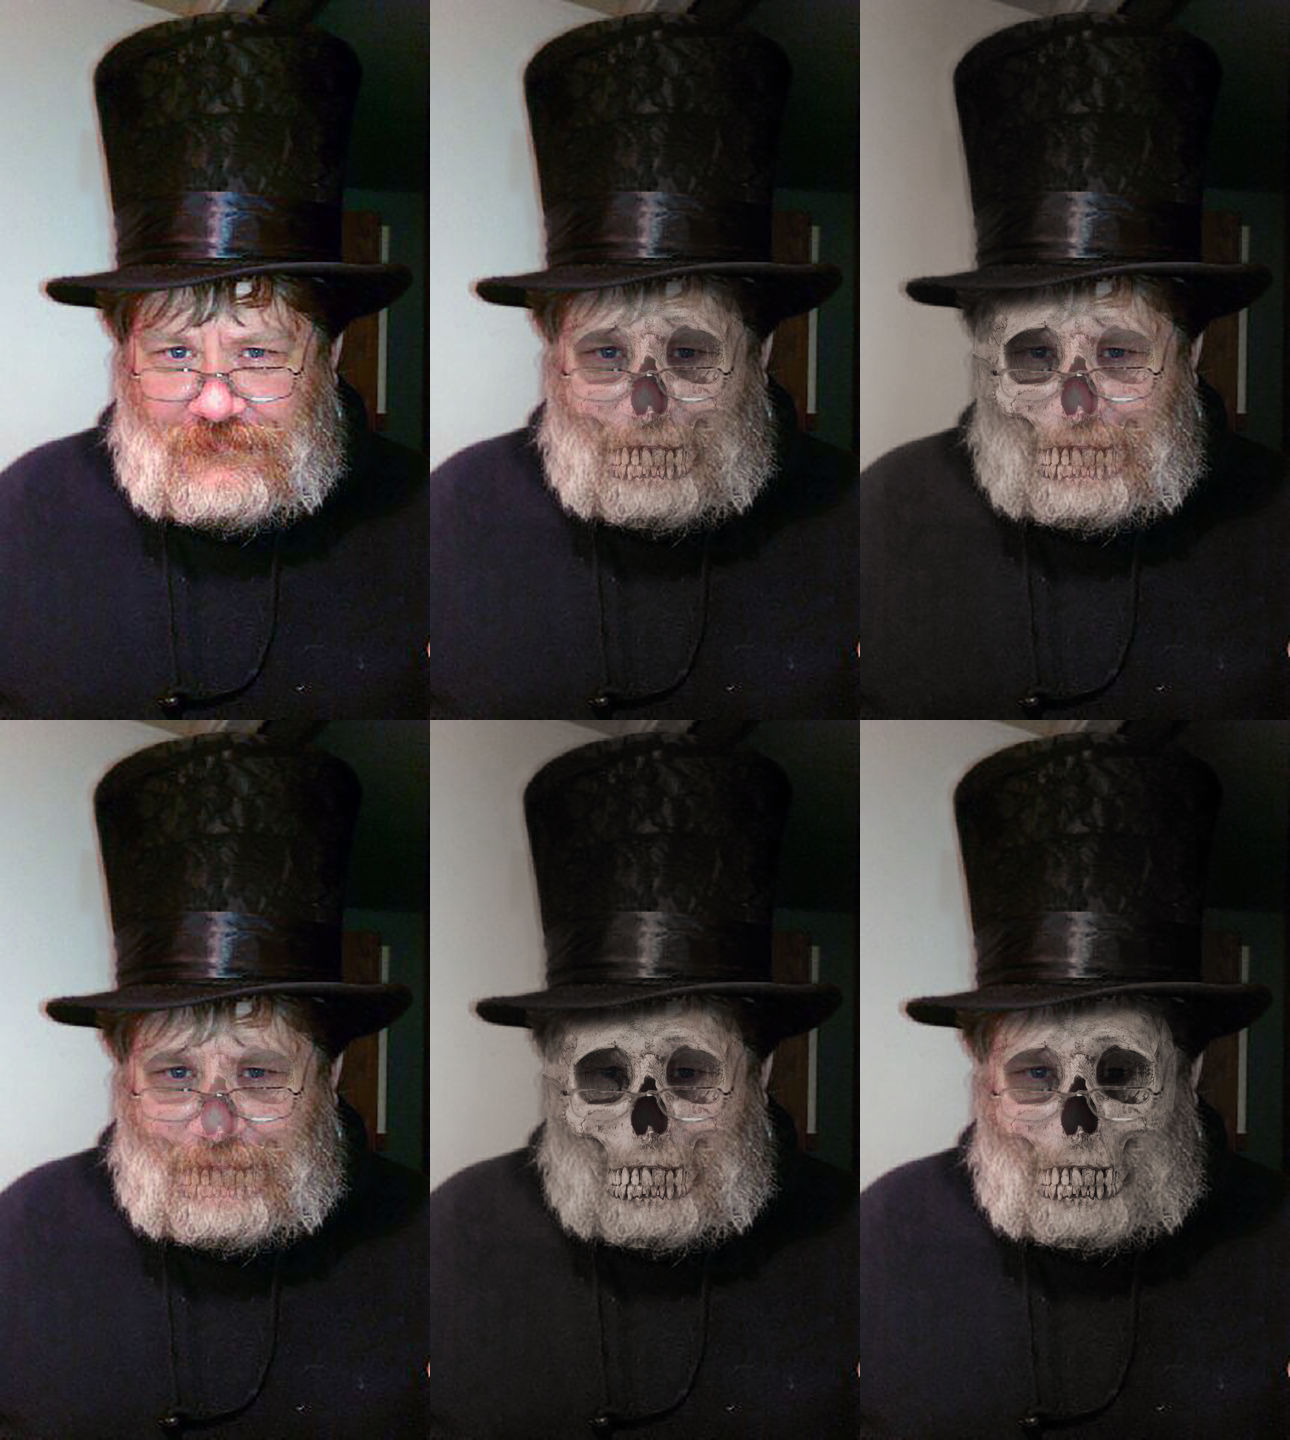 Six different versions of the photograph of Kurt in a top hat.  In each frame, there is more or less of a gaping skull visible, blended in with his face.  In some frames, the skeleton is more visible on one side, in some on the other.